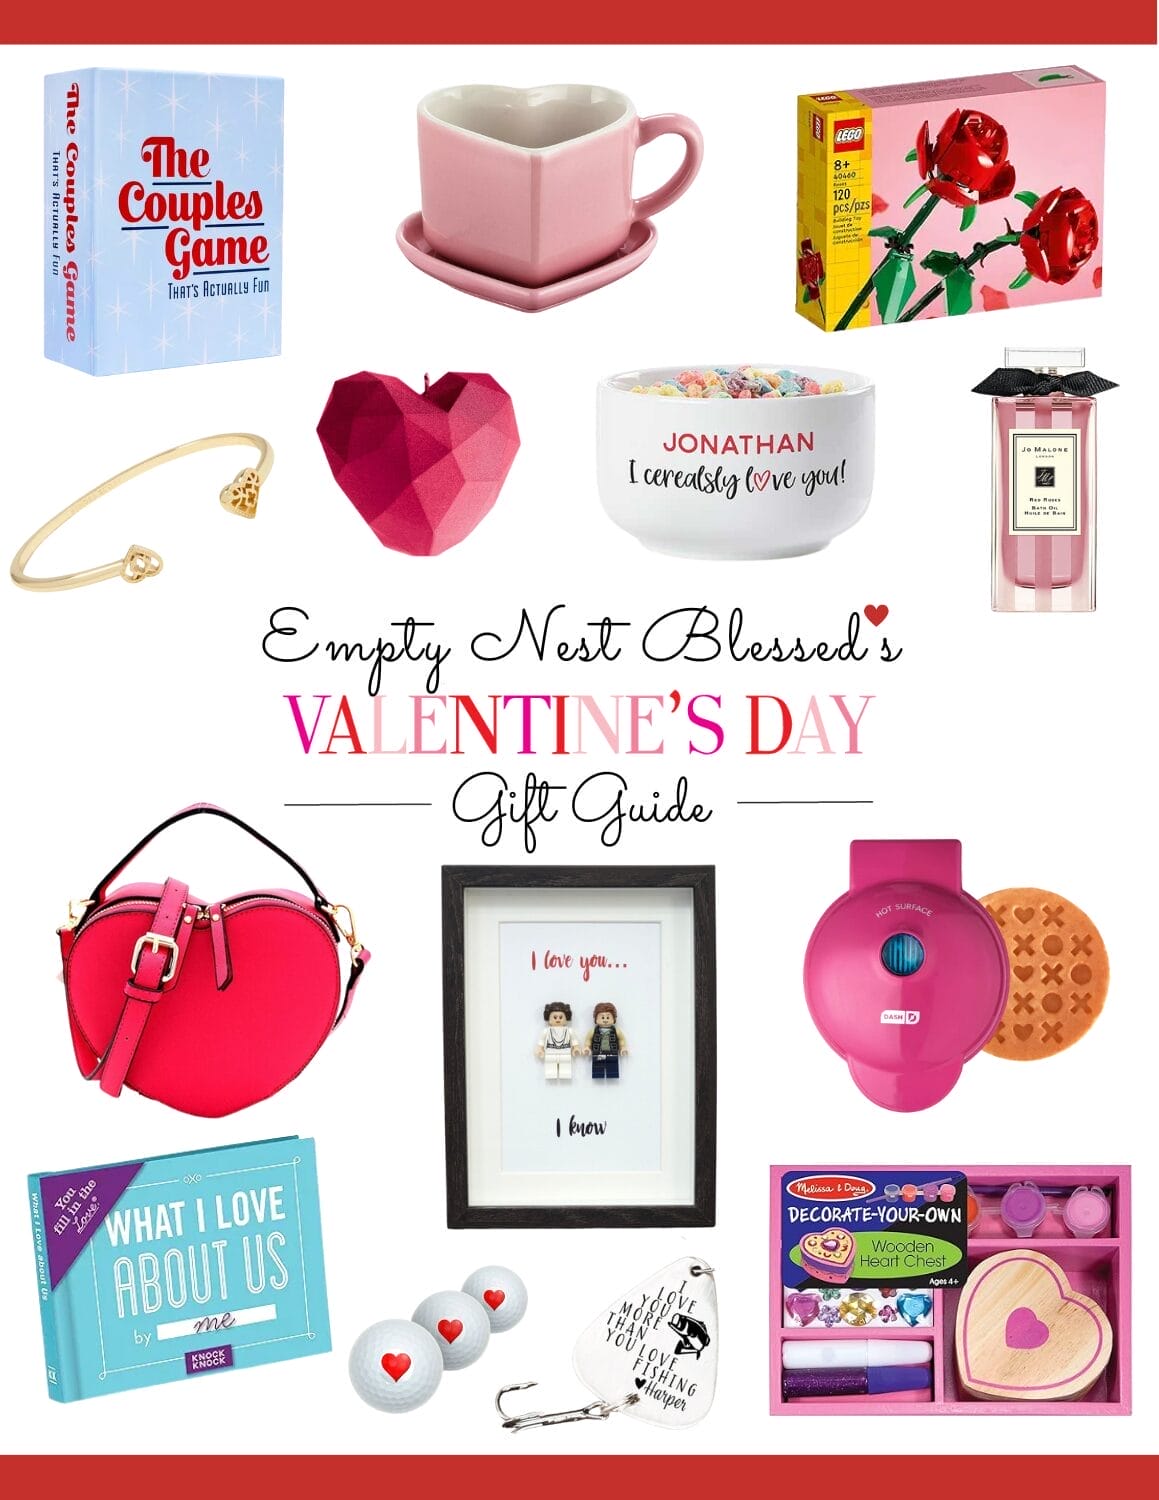 https://efe8cw77t88.exactdn.com/wp-content/uploads/2024/01/Valentines-Day-Gift-Guide-Collage.jpg?strip=all&lossy=1&ssl=1